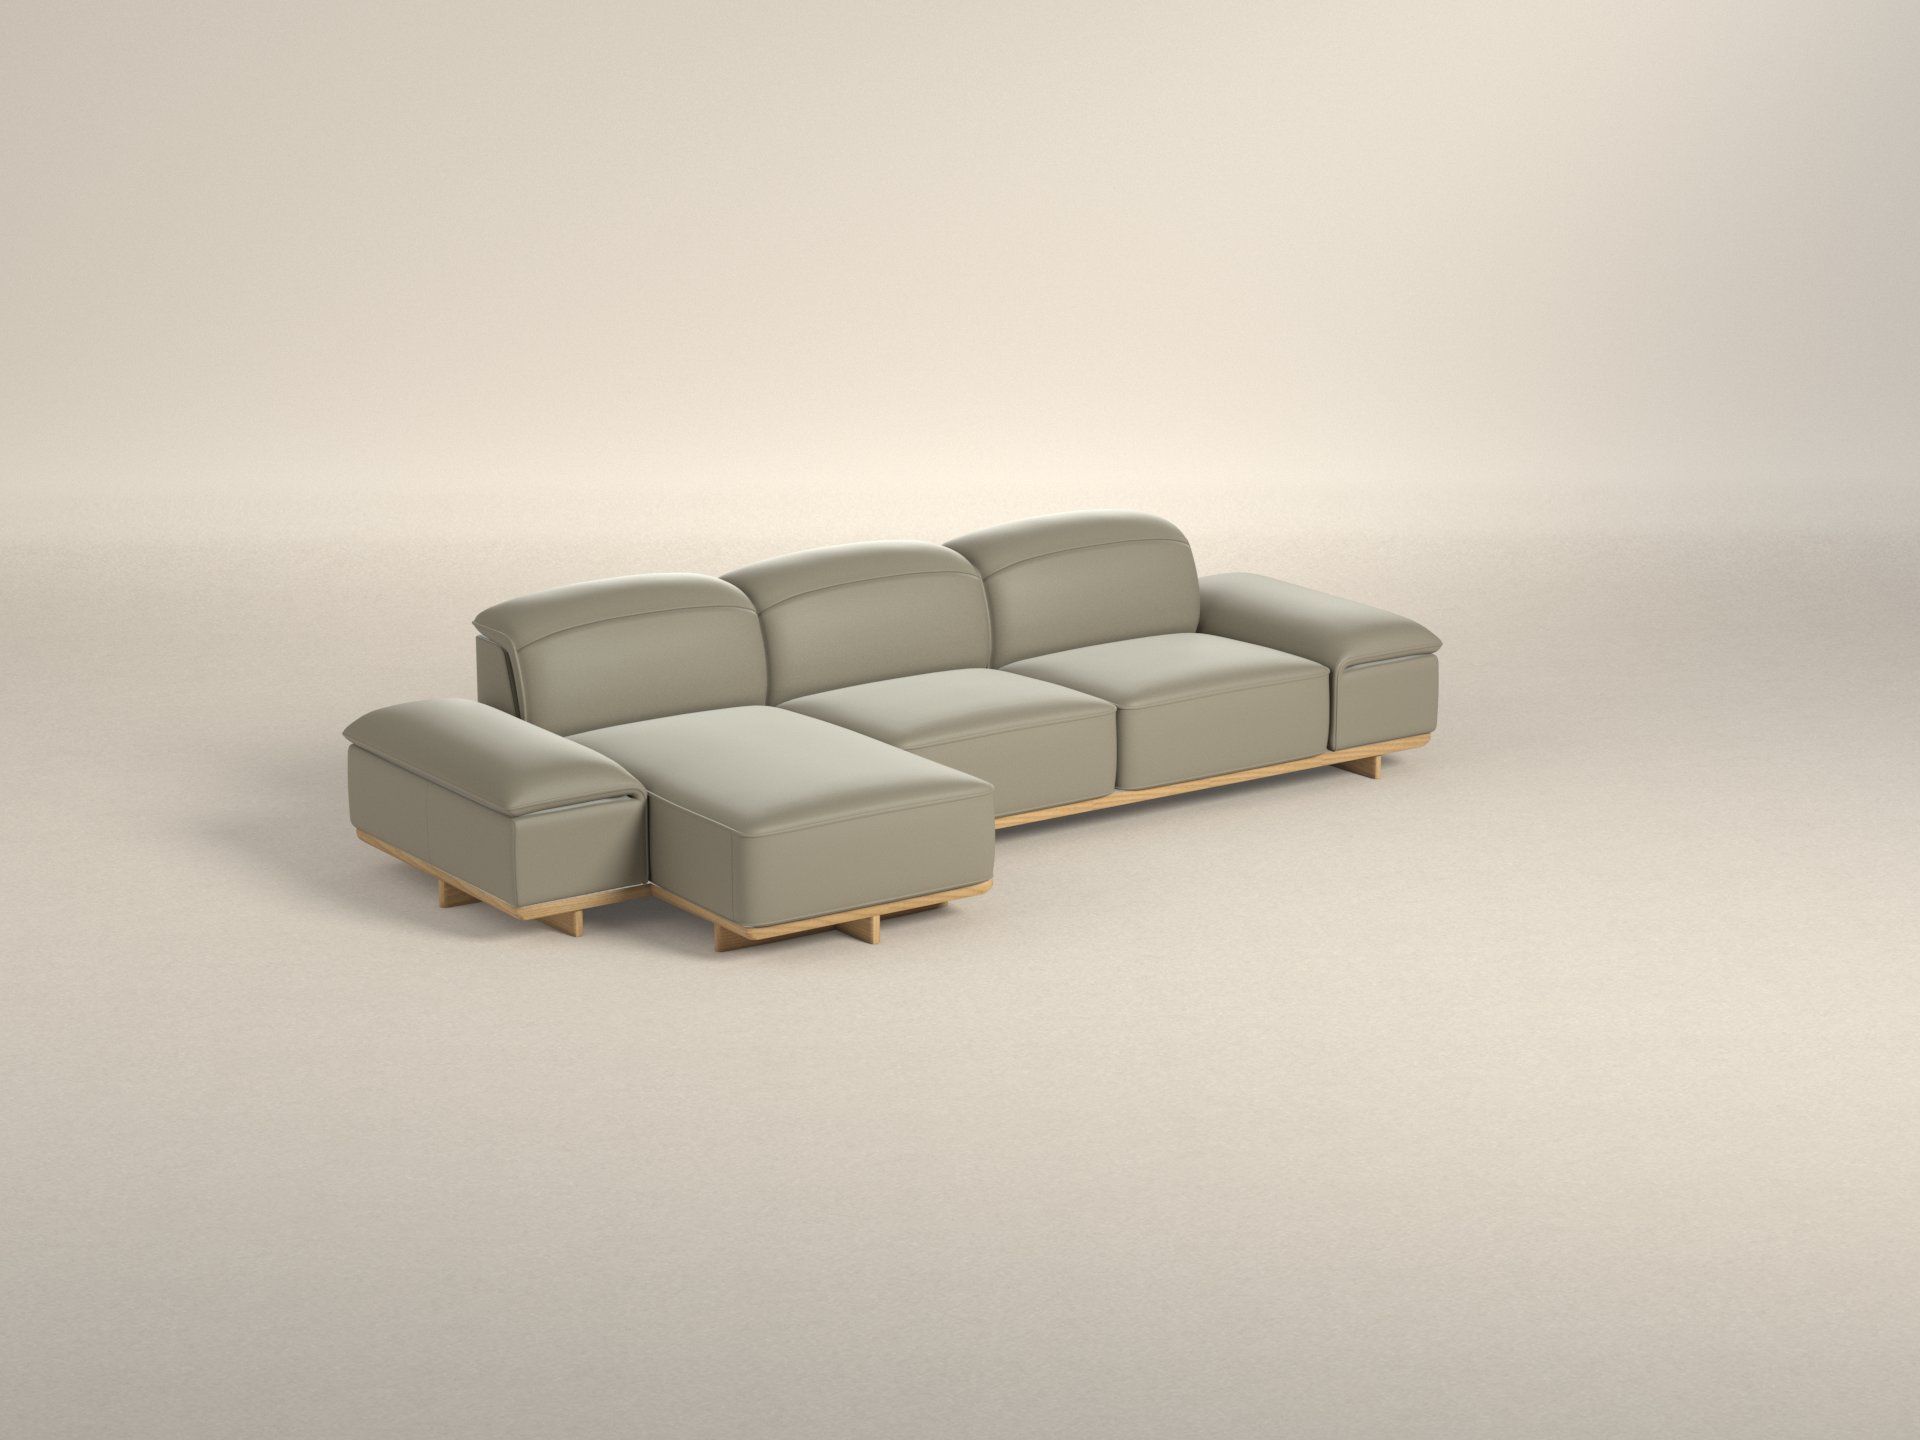 Preset default image - Adam Sofa with Chaise on left side - Leather